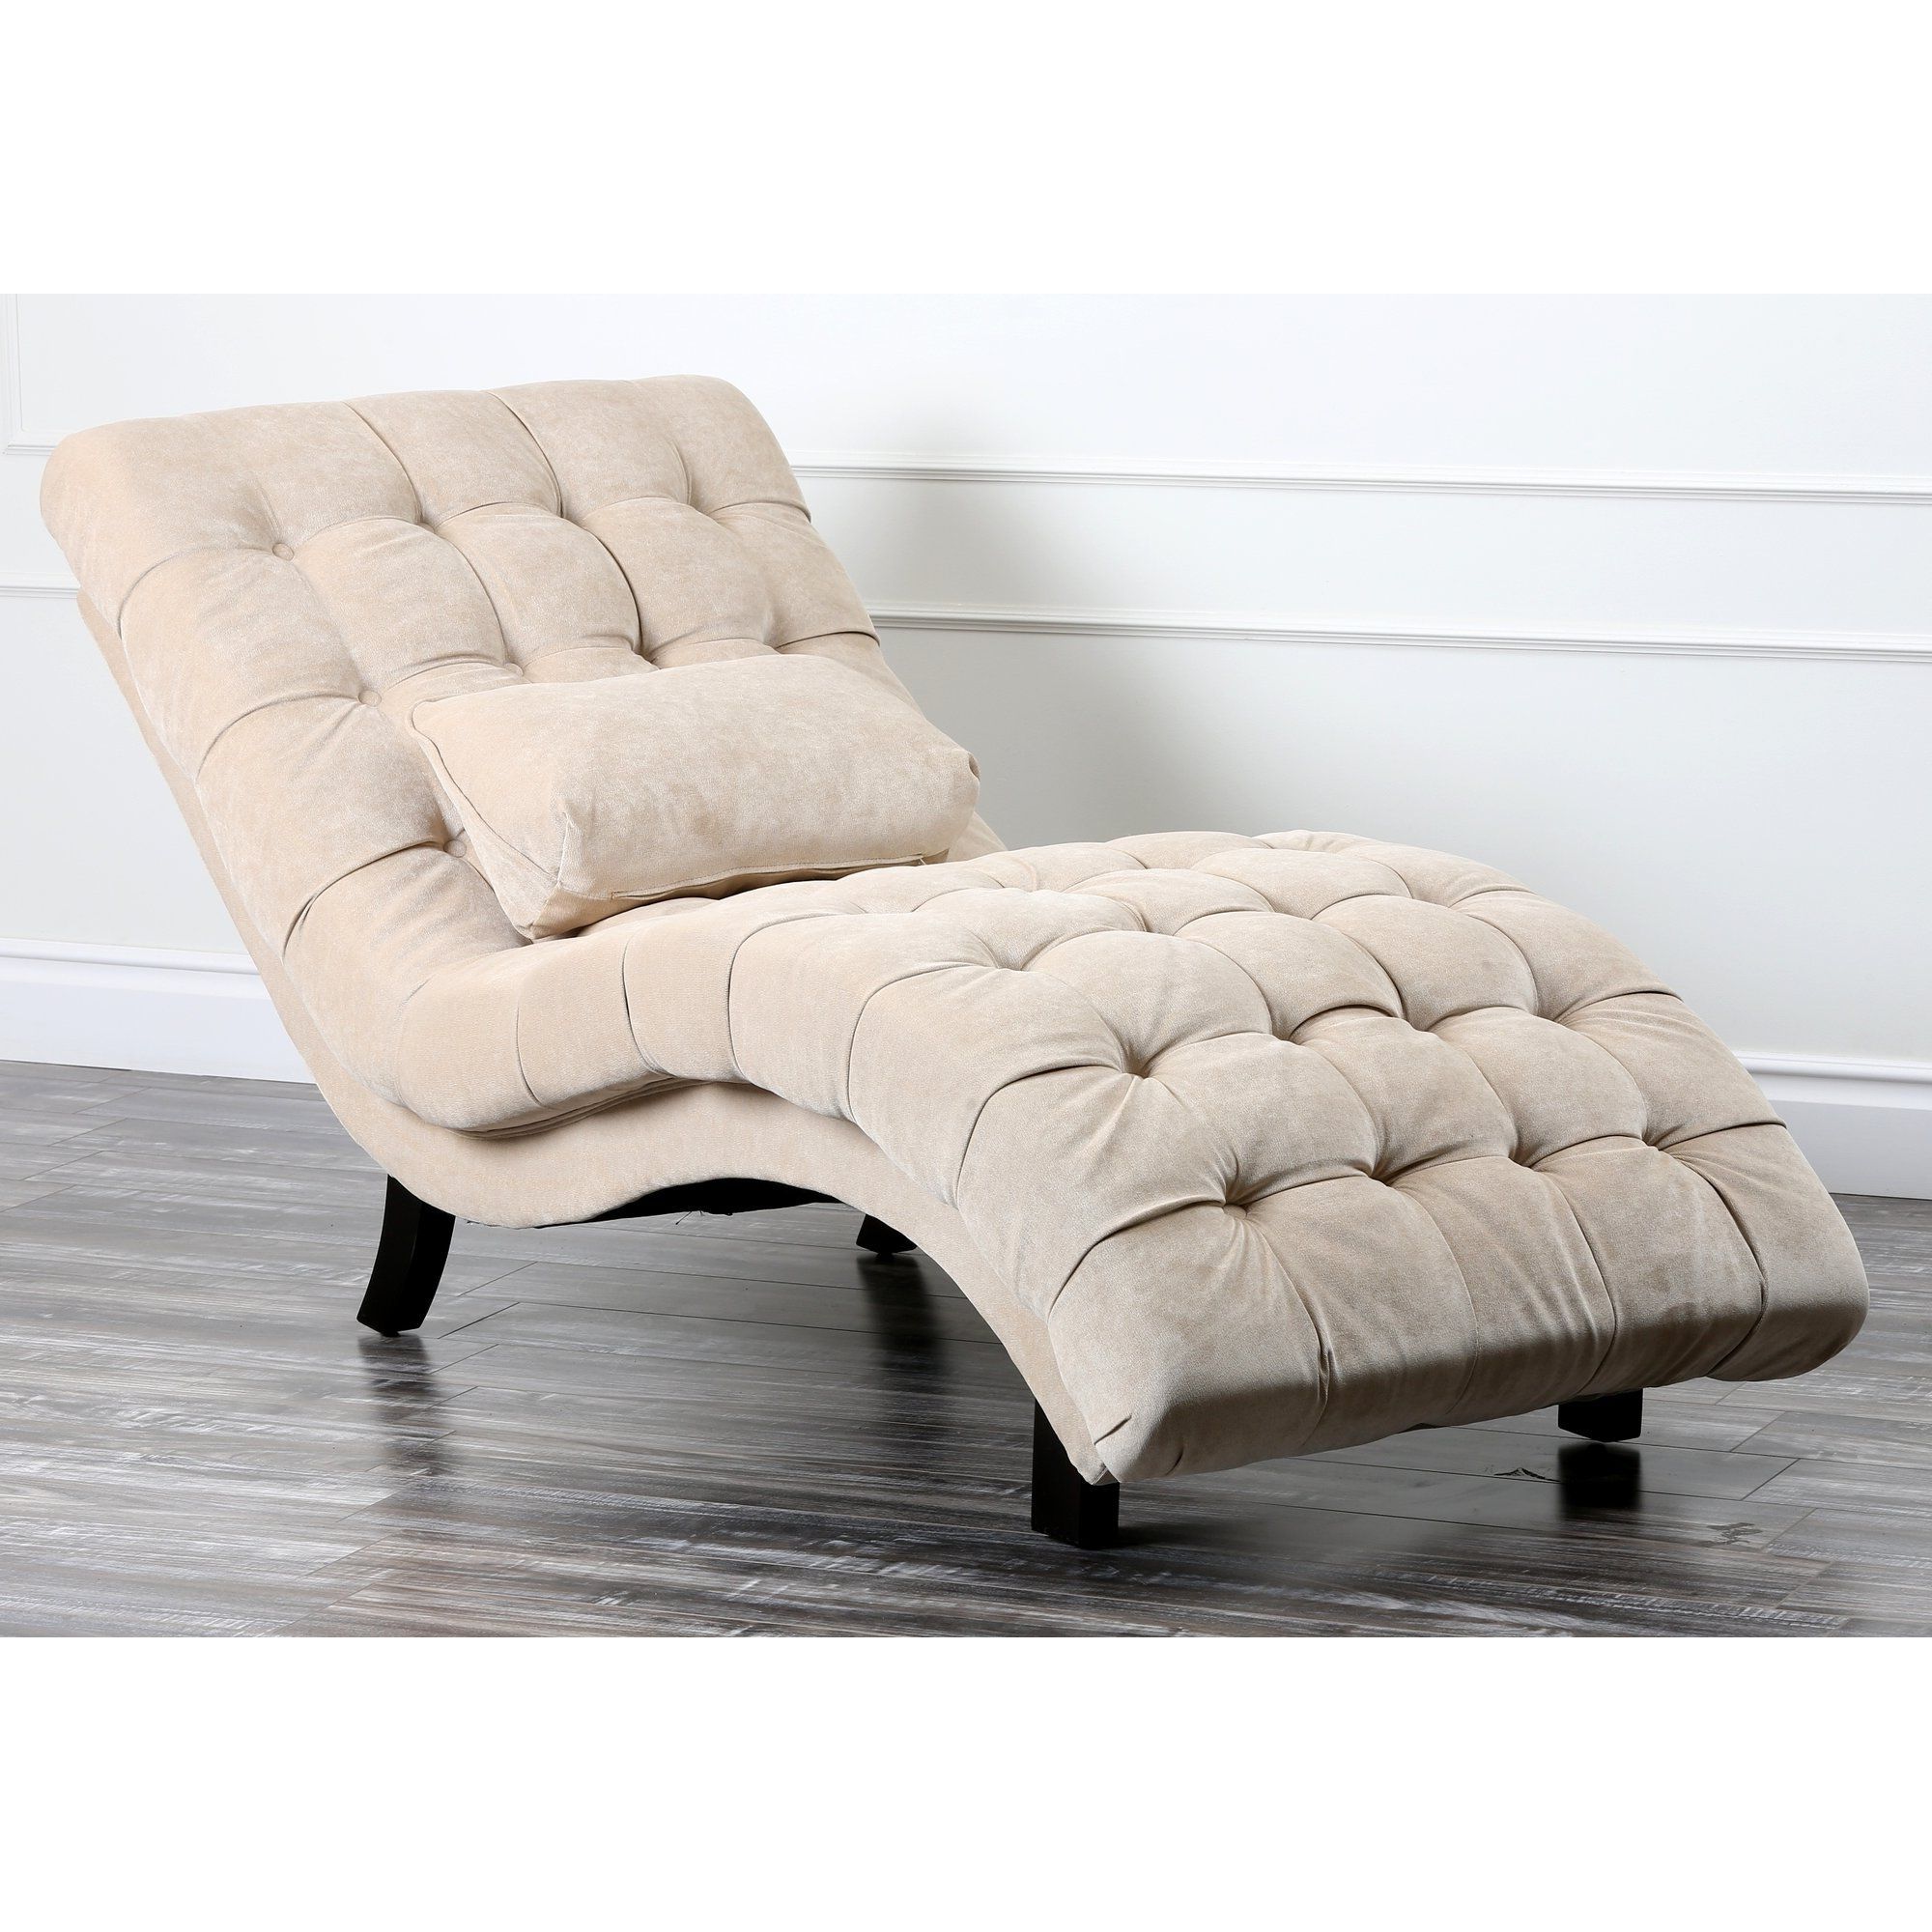 Favorite Bedroom Chaise Lounge Chairs Regarding Awesome Modern Bedroom Chair Amazing Comfortable Living Room Pics (View 1 of 15)